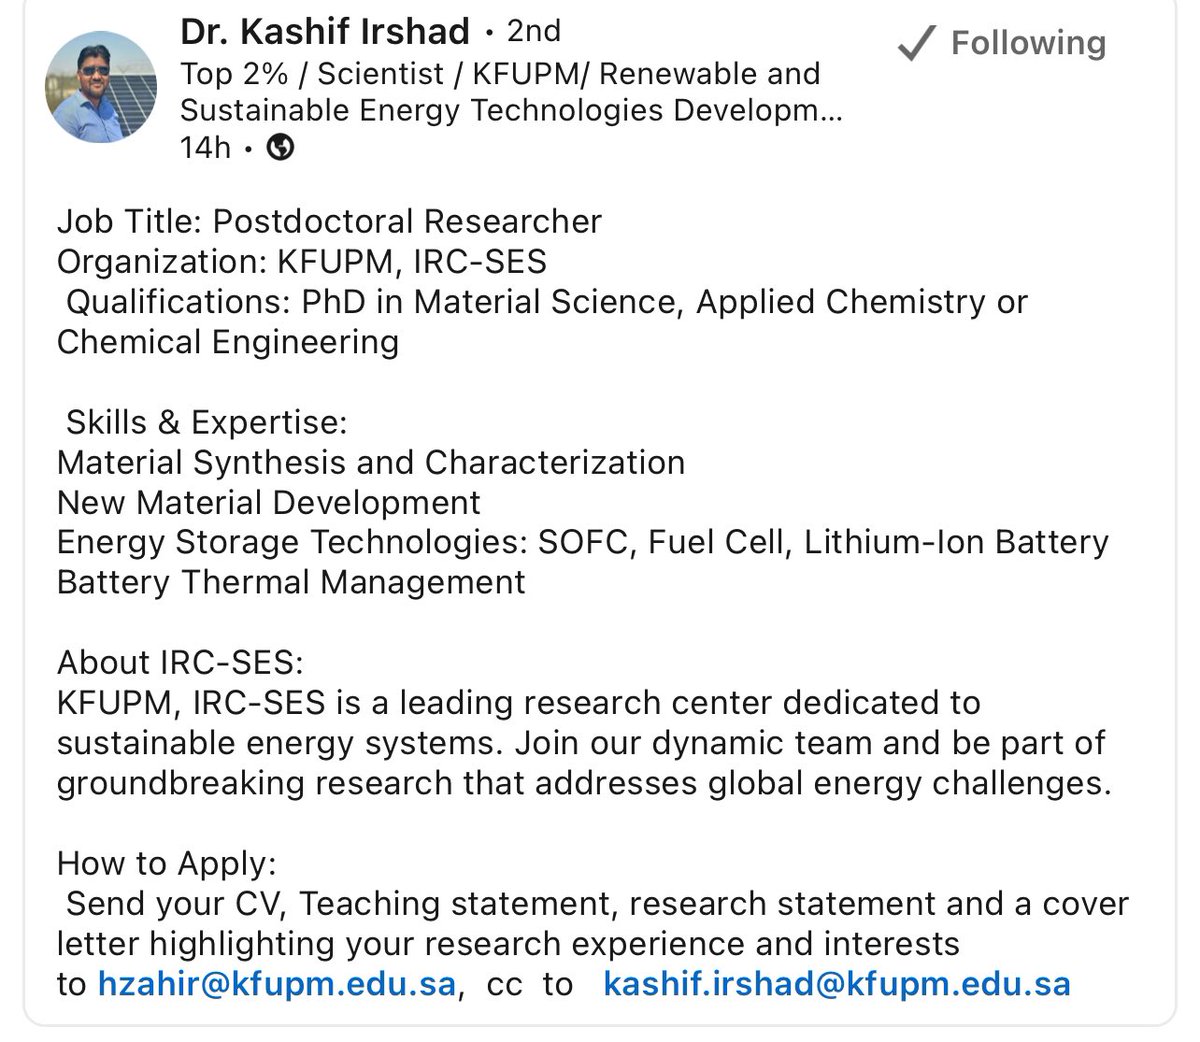 #PostDocPosition #MaterialScience #Battery #Energystroge #Fuelcell #KFUPM